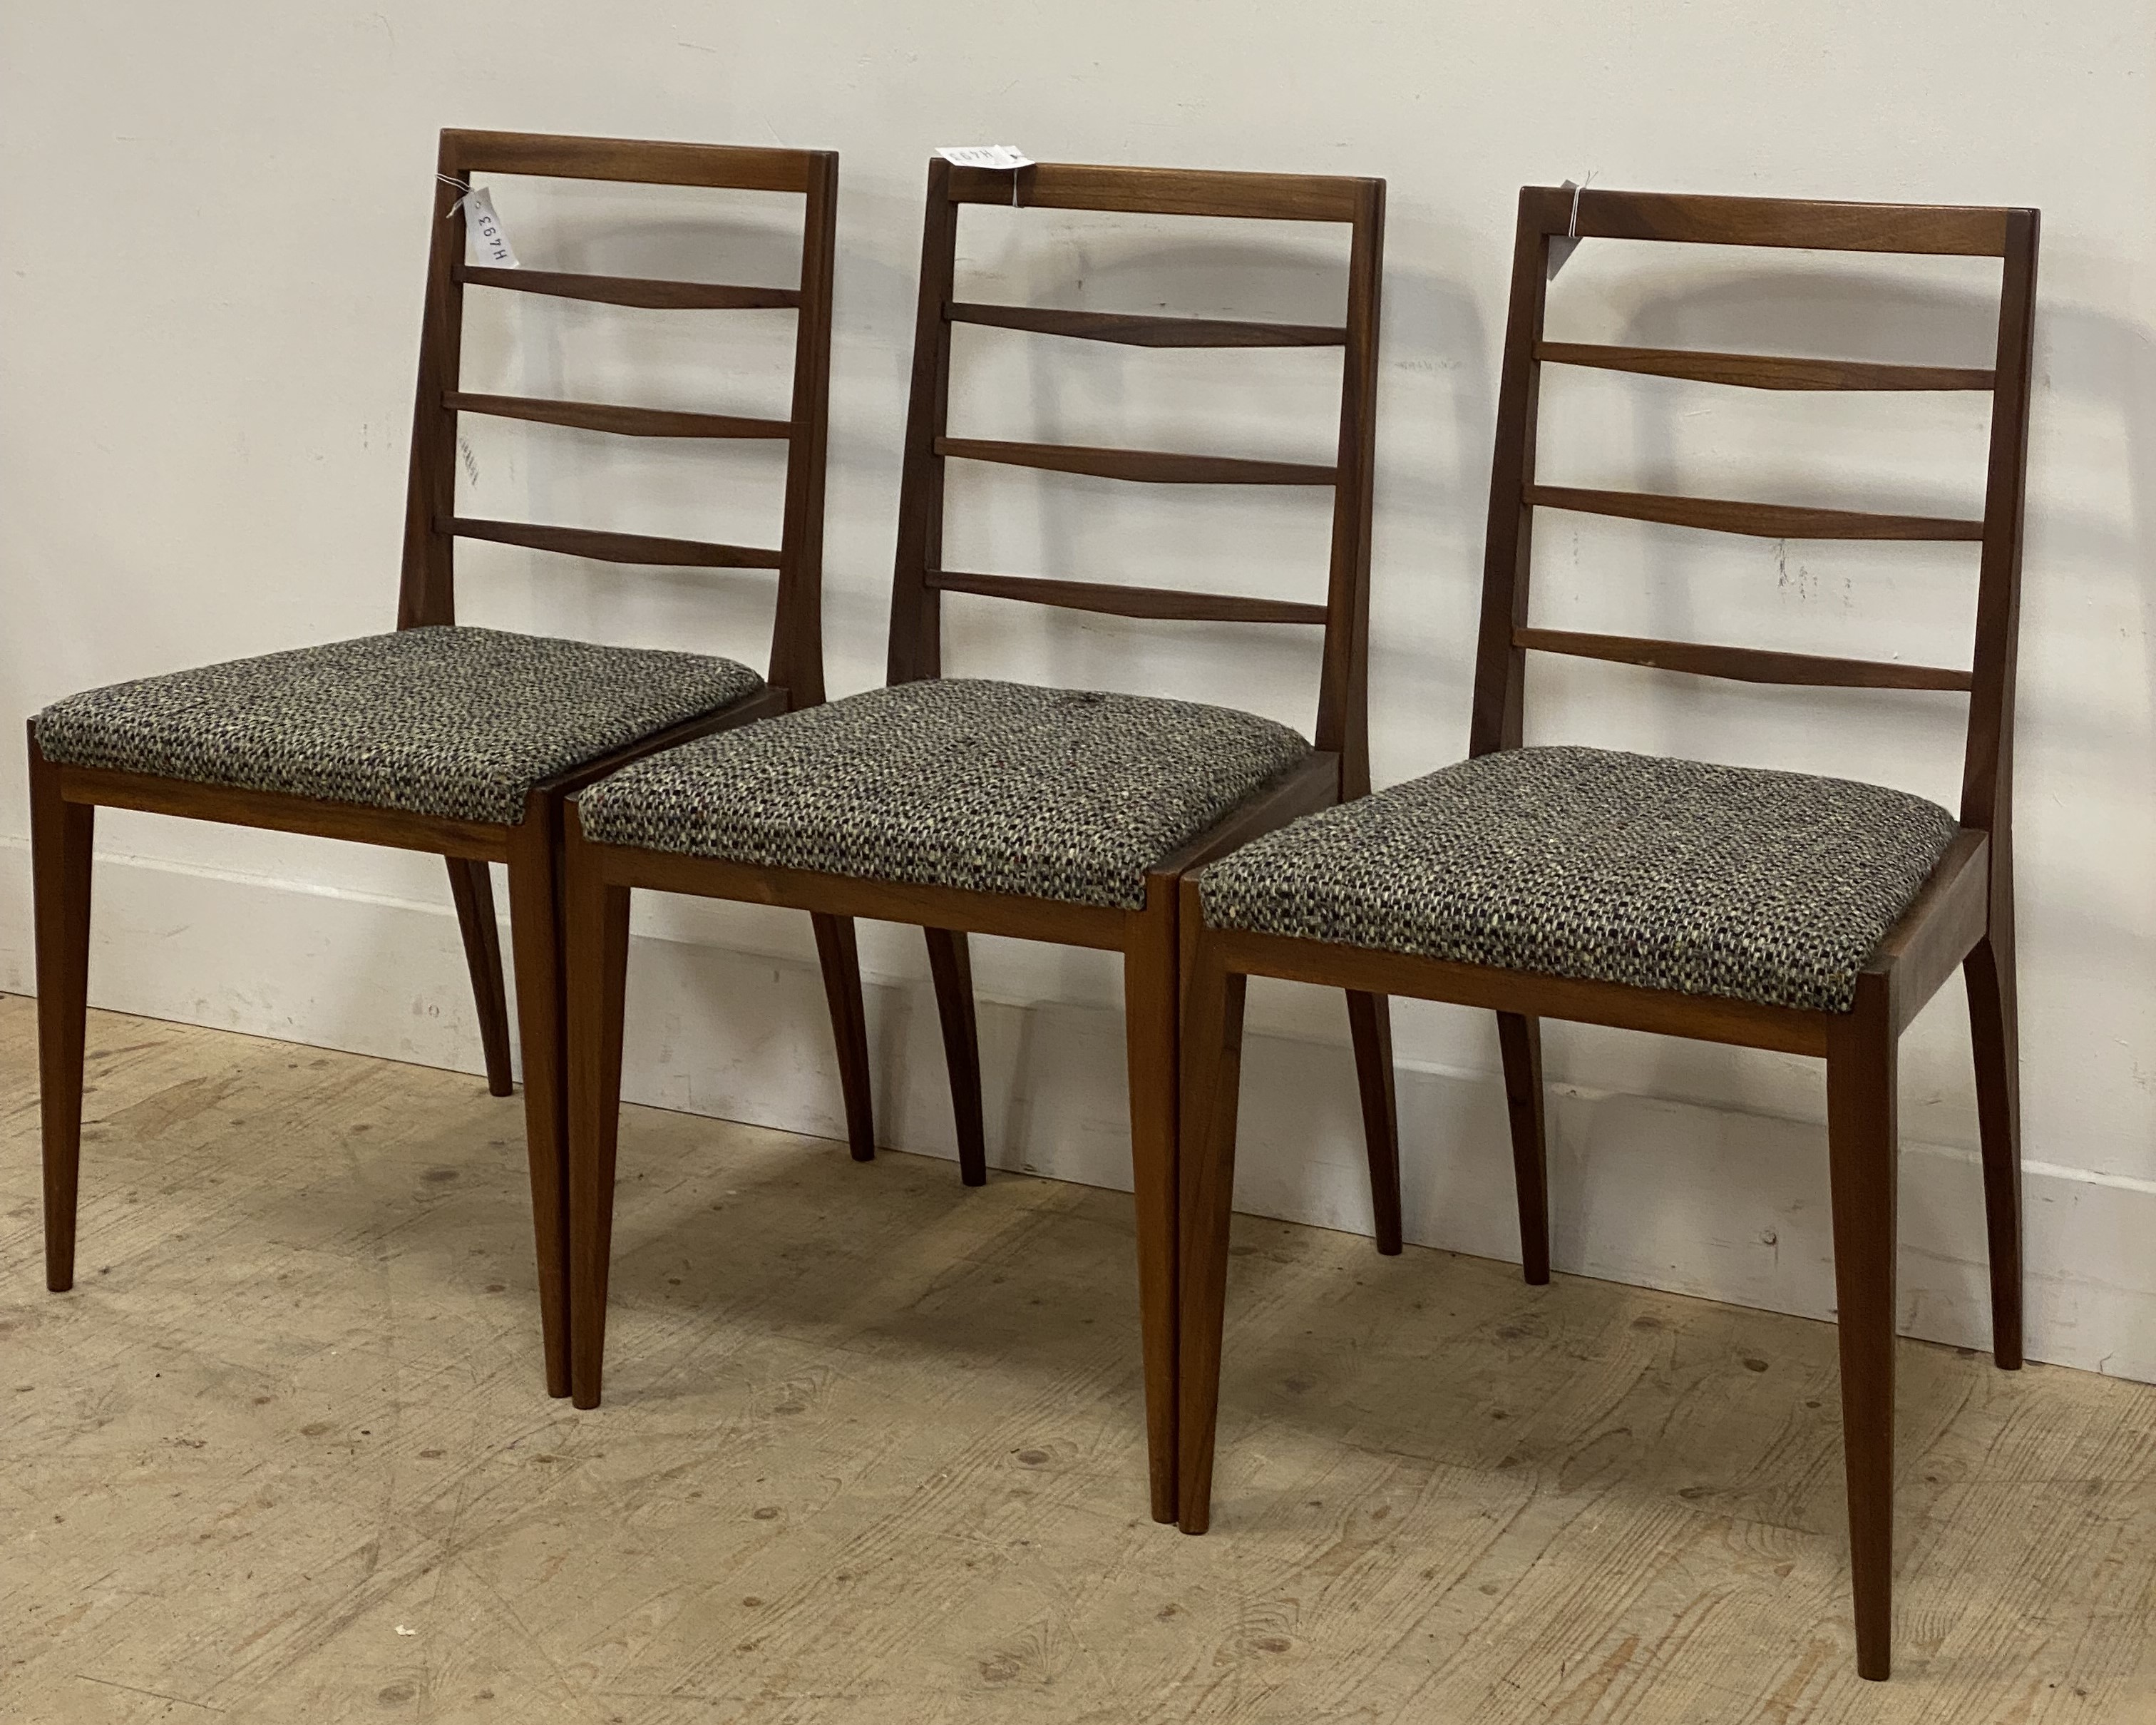 McIntosh, a set of three mid century teak dining chairs, with ladder backs, upholstered seat pads